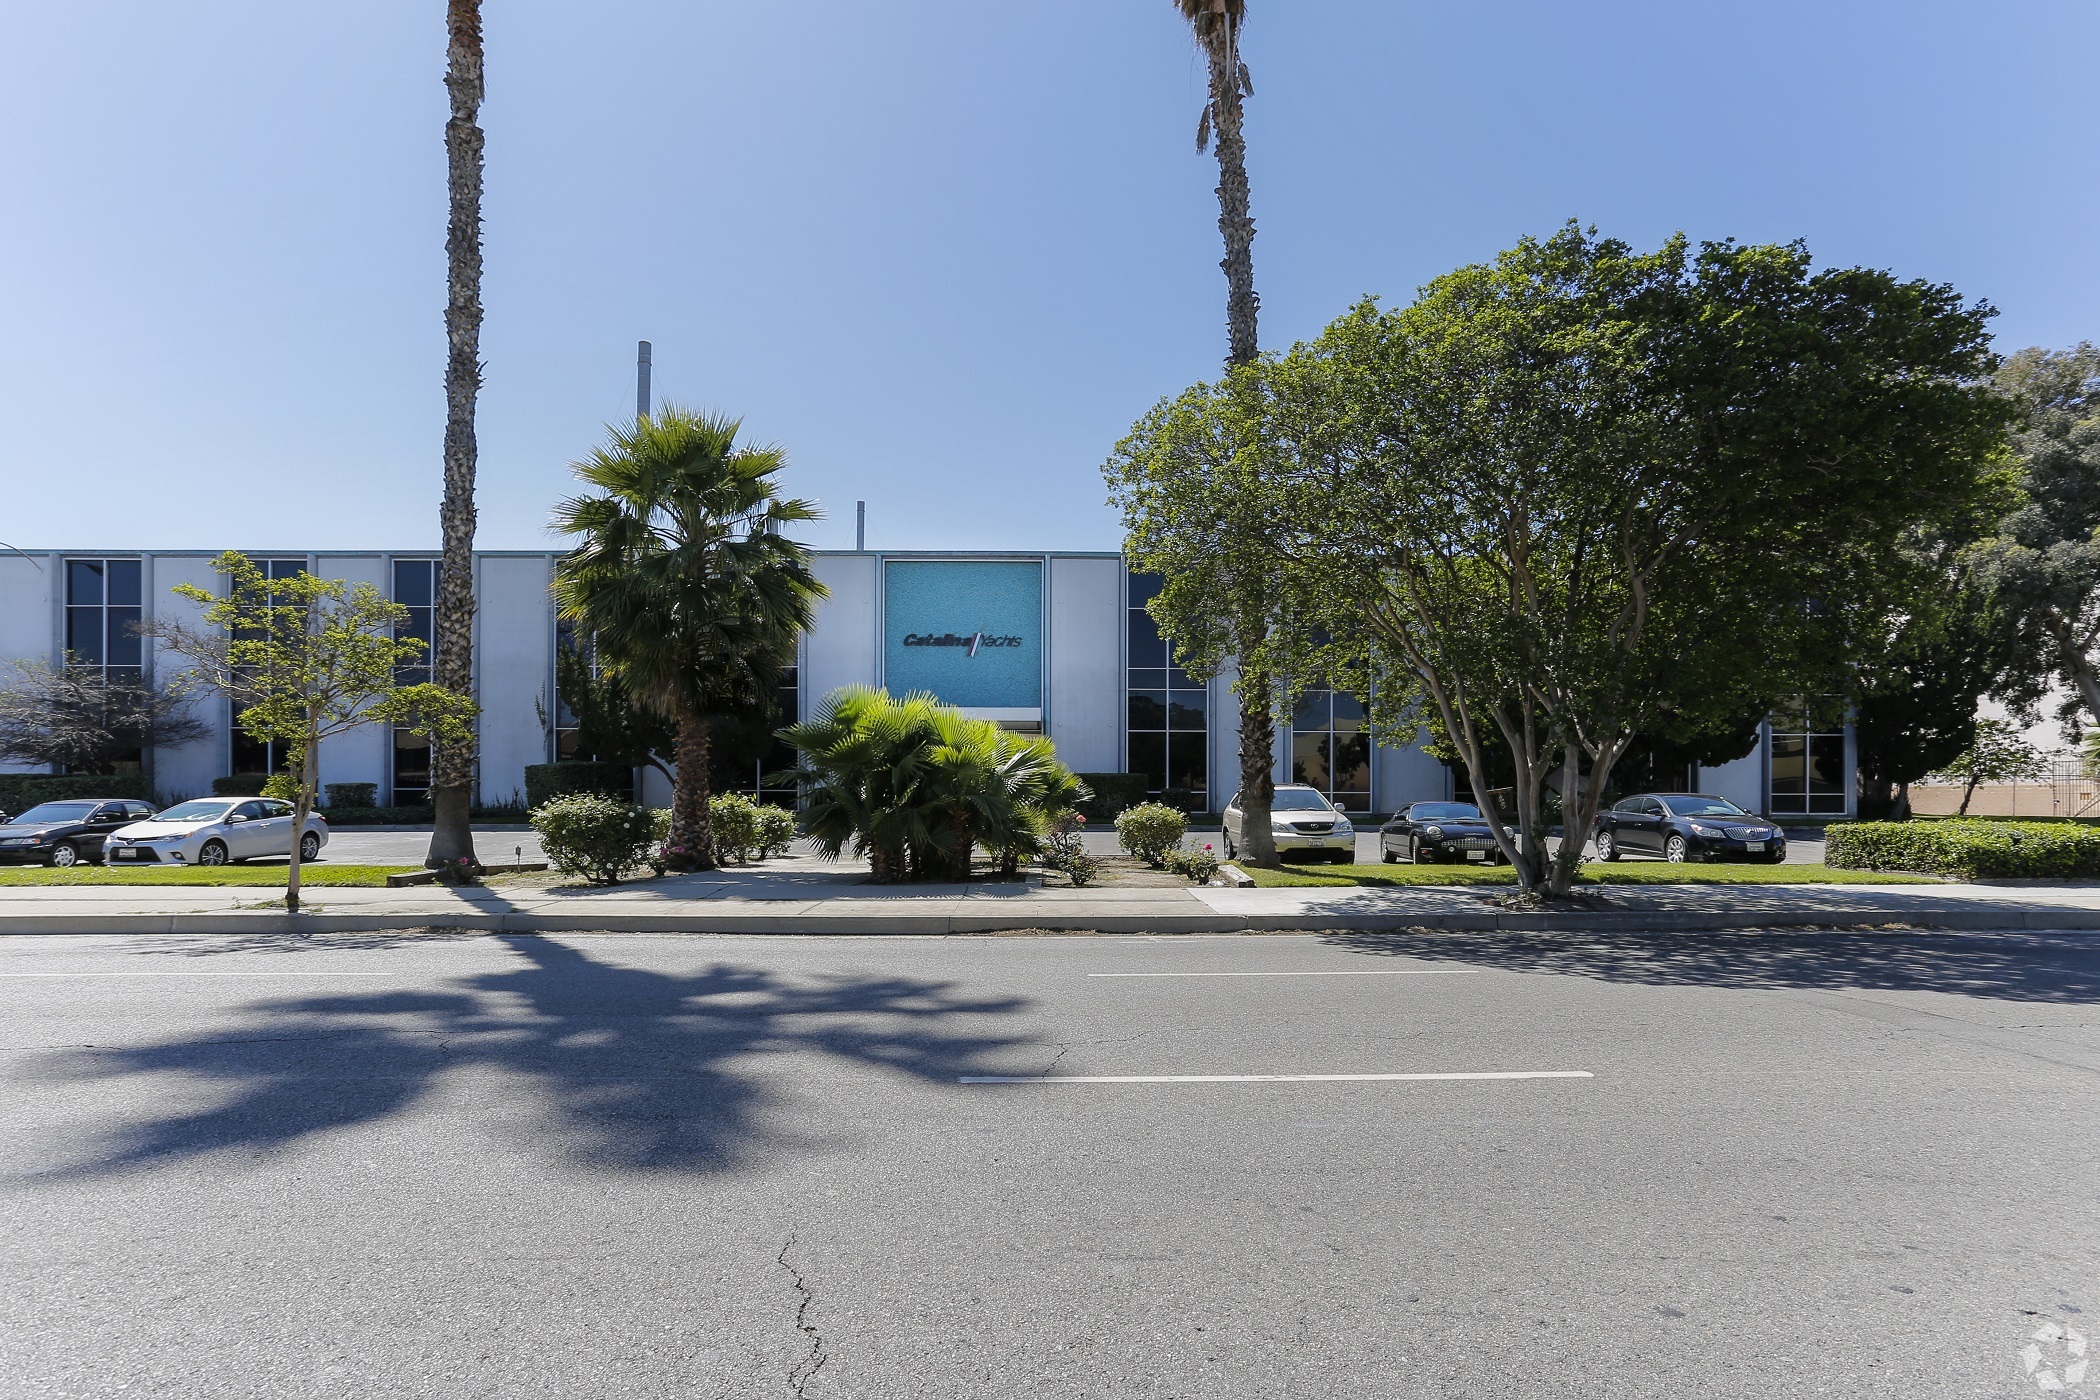 A roughly 184,000-square-foot warehouse at 21200 Victory Blvd. in Los Angeles has sold again. In 2022, permits were sought to convert the warehouse into a movie and TV production facility. (CoStar)